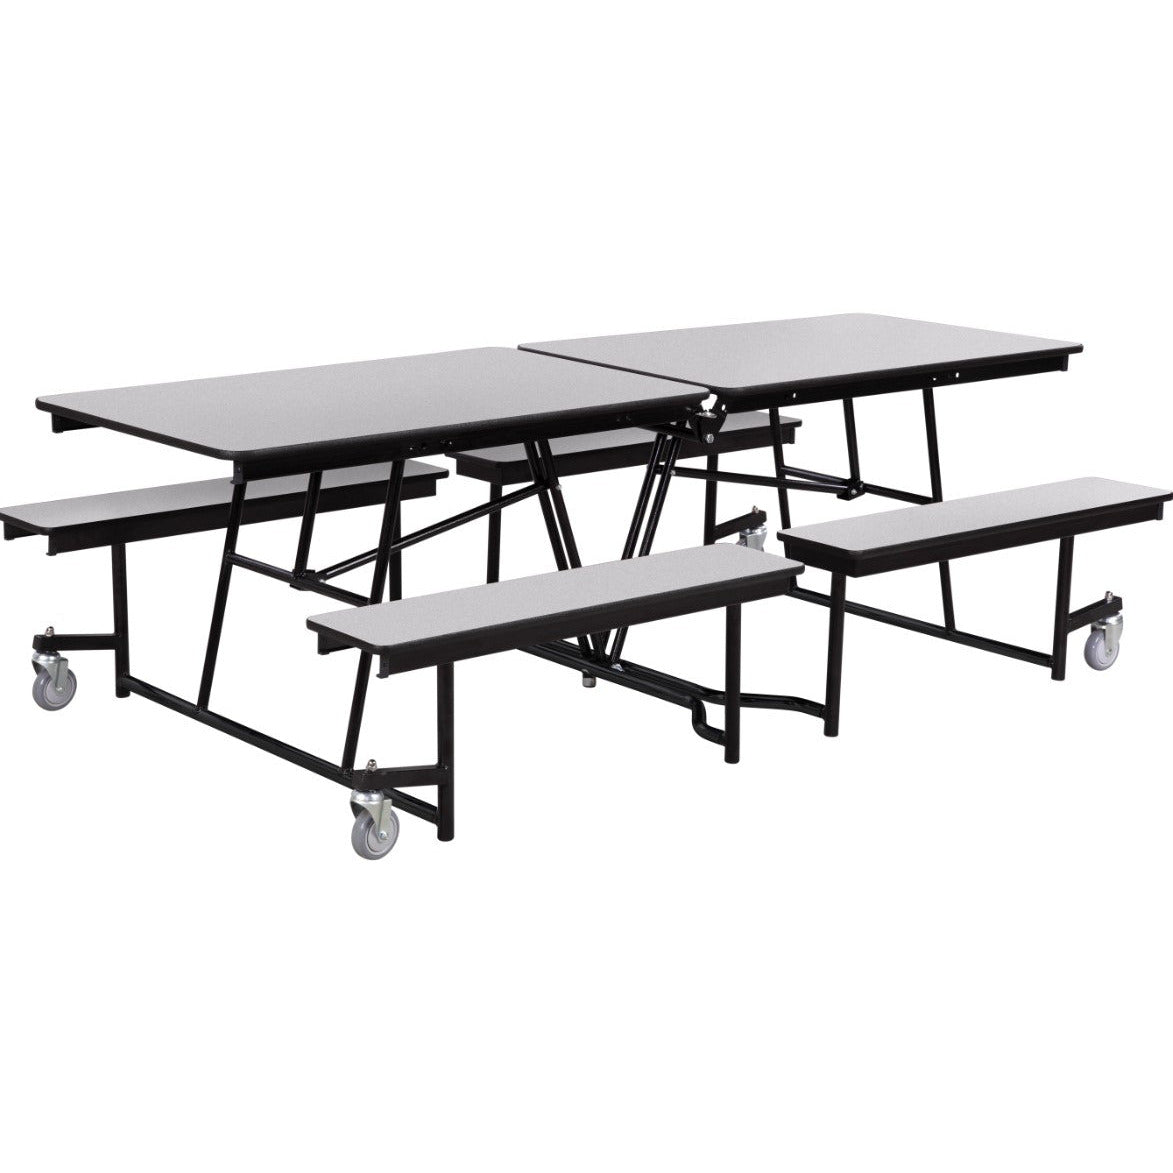 NPS Bench Cafeteria Table - 12' - Plywood Core - ProtectEdge - Black Powdercoating Frame - Pearl Soapstone FINE VELVET TEXTURE FINISH Table Top - Asian Night SOFTGRAIN FINISH Bench